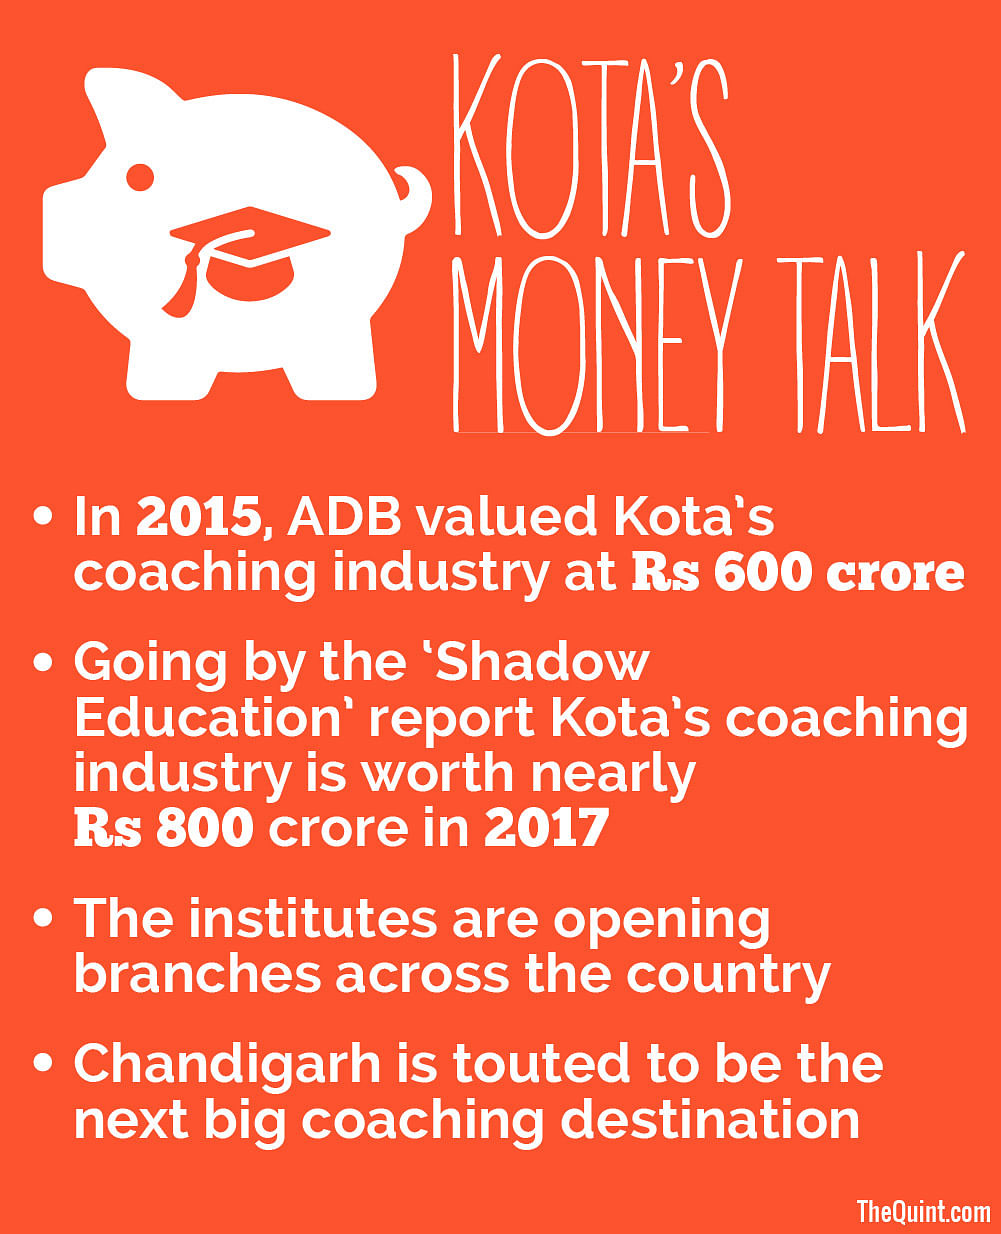 The Indian coaching industry as a whole is worth an estimated $16 billion. 